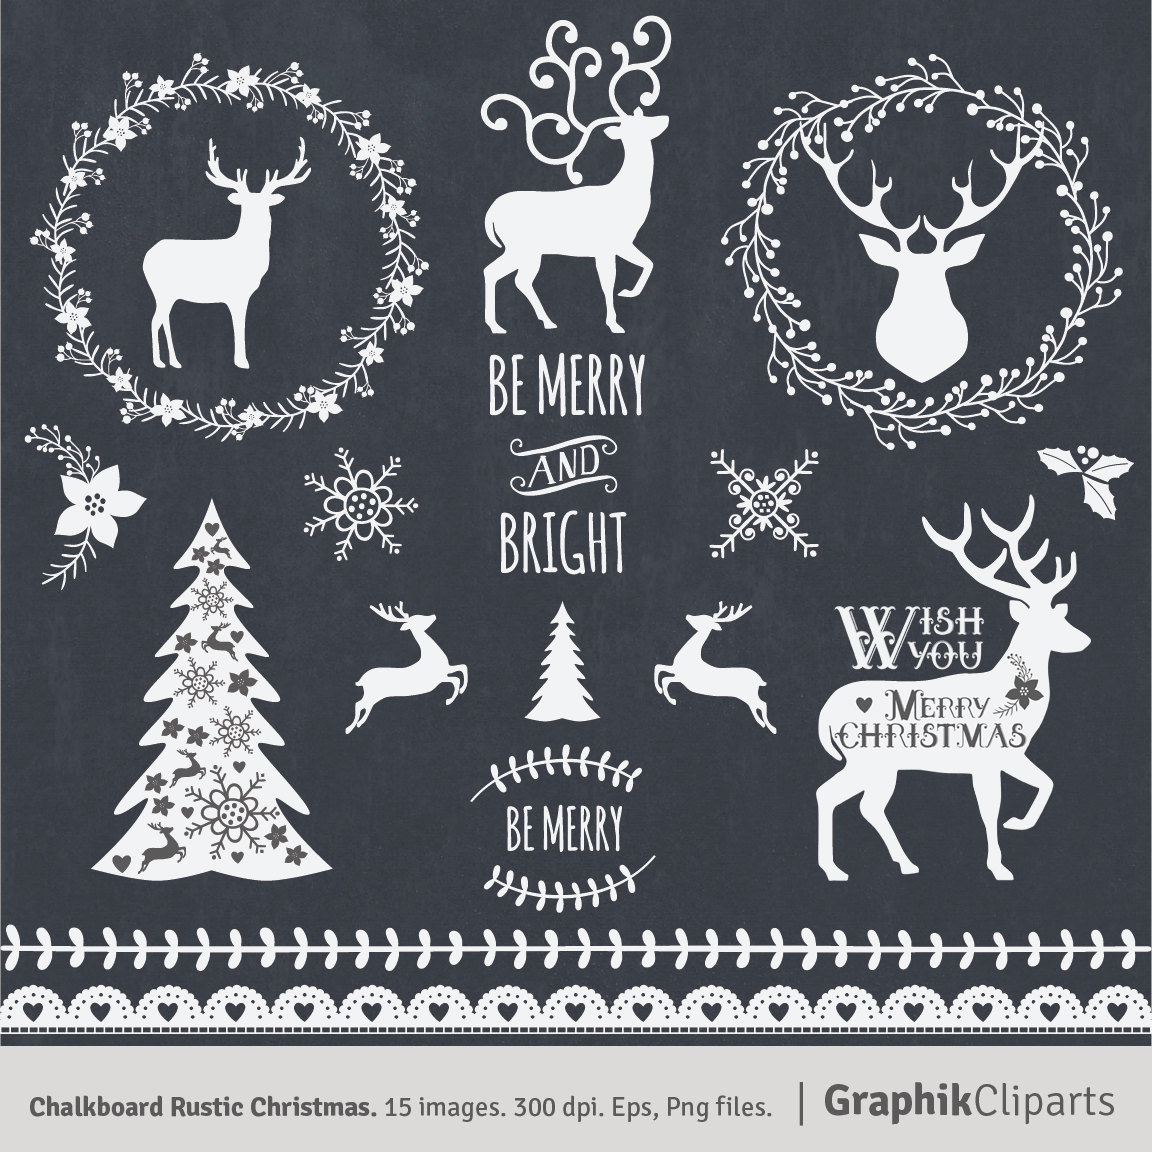 Chalkboard Rustic Christmas  Christmas Clipart  By Graphikcliparts